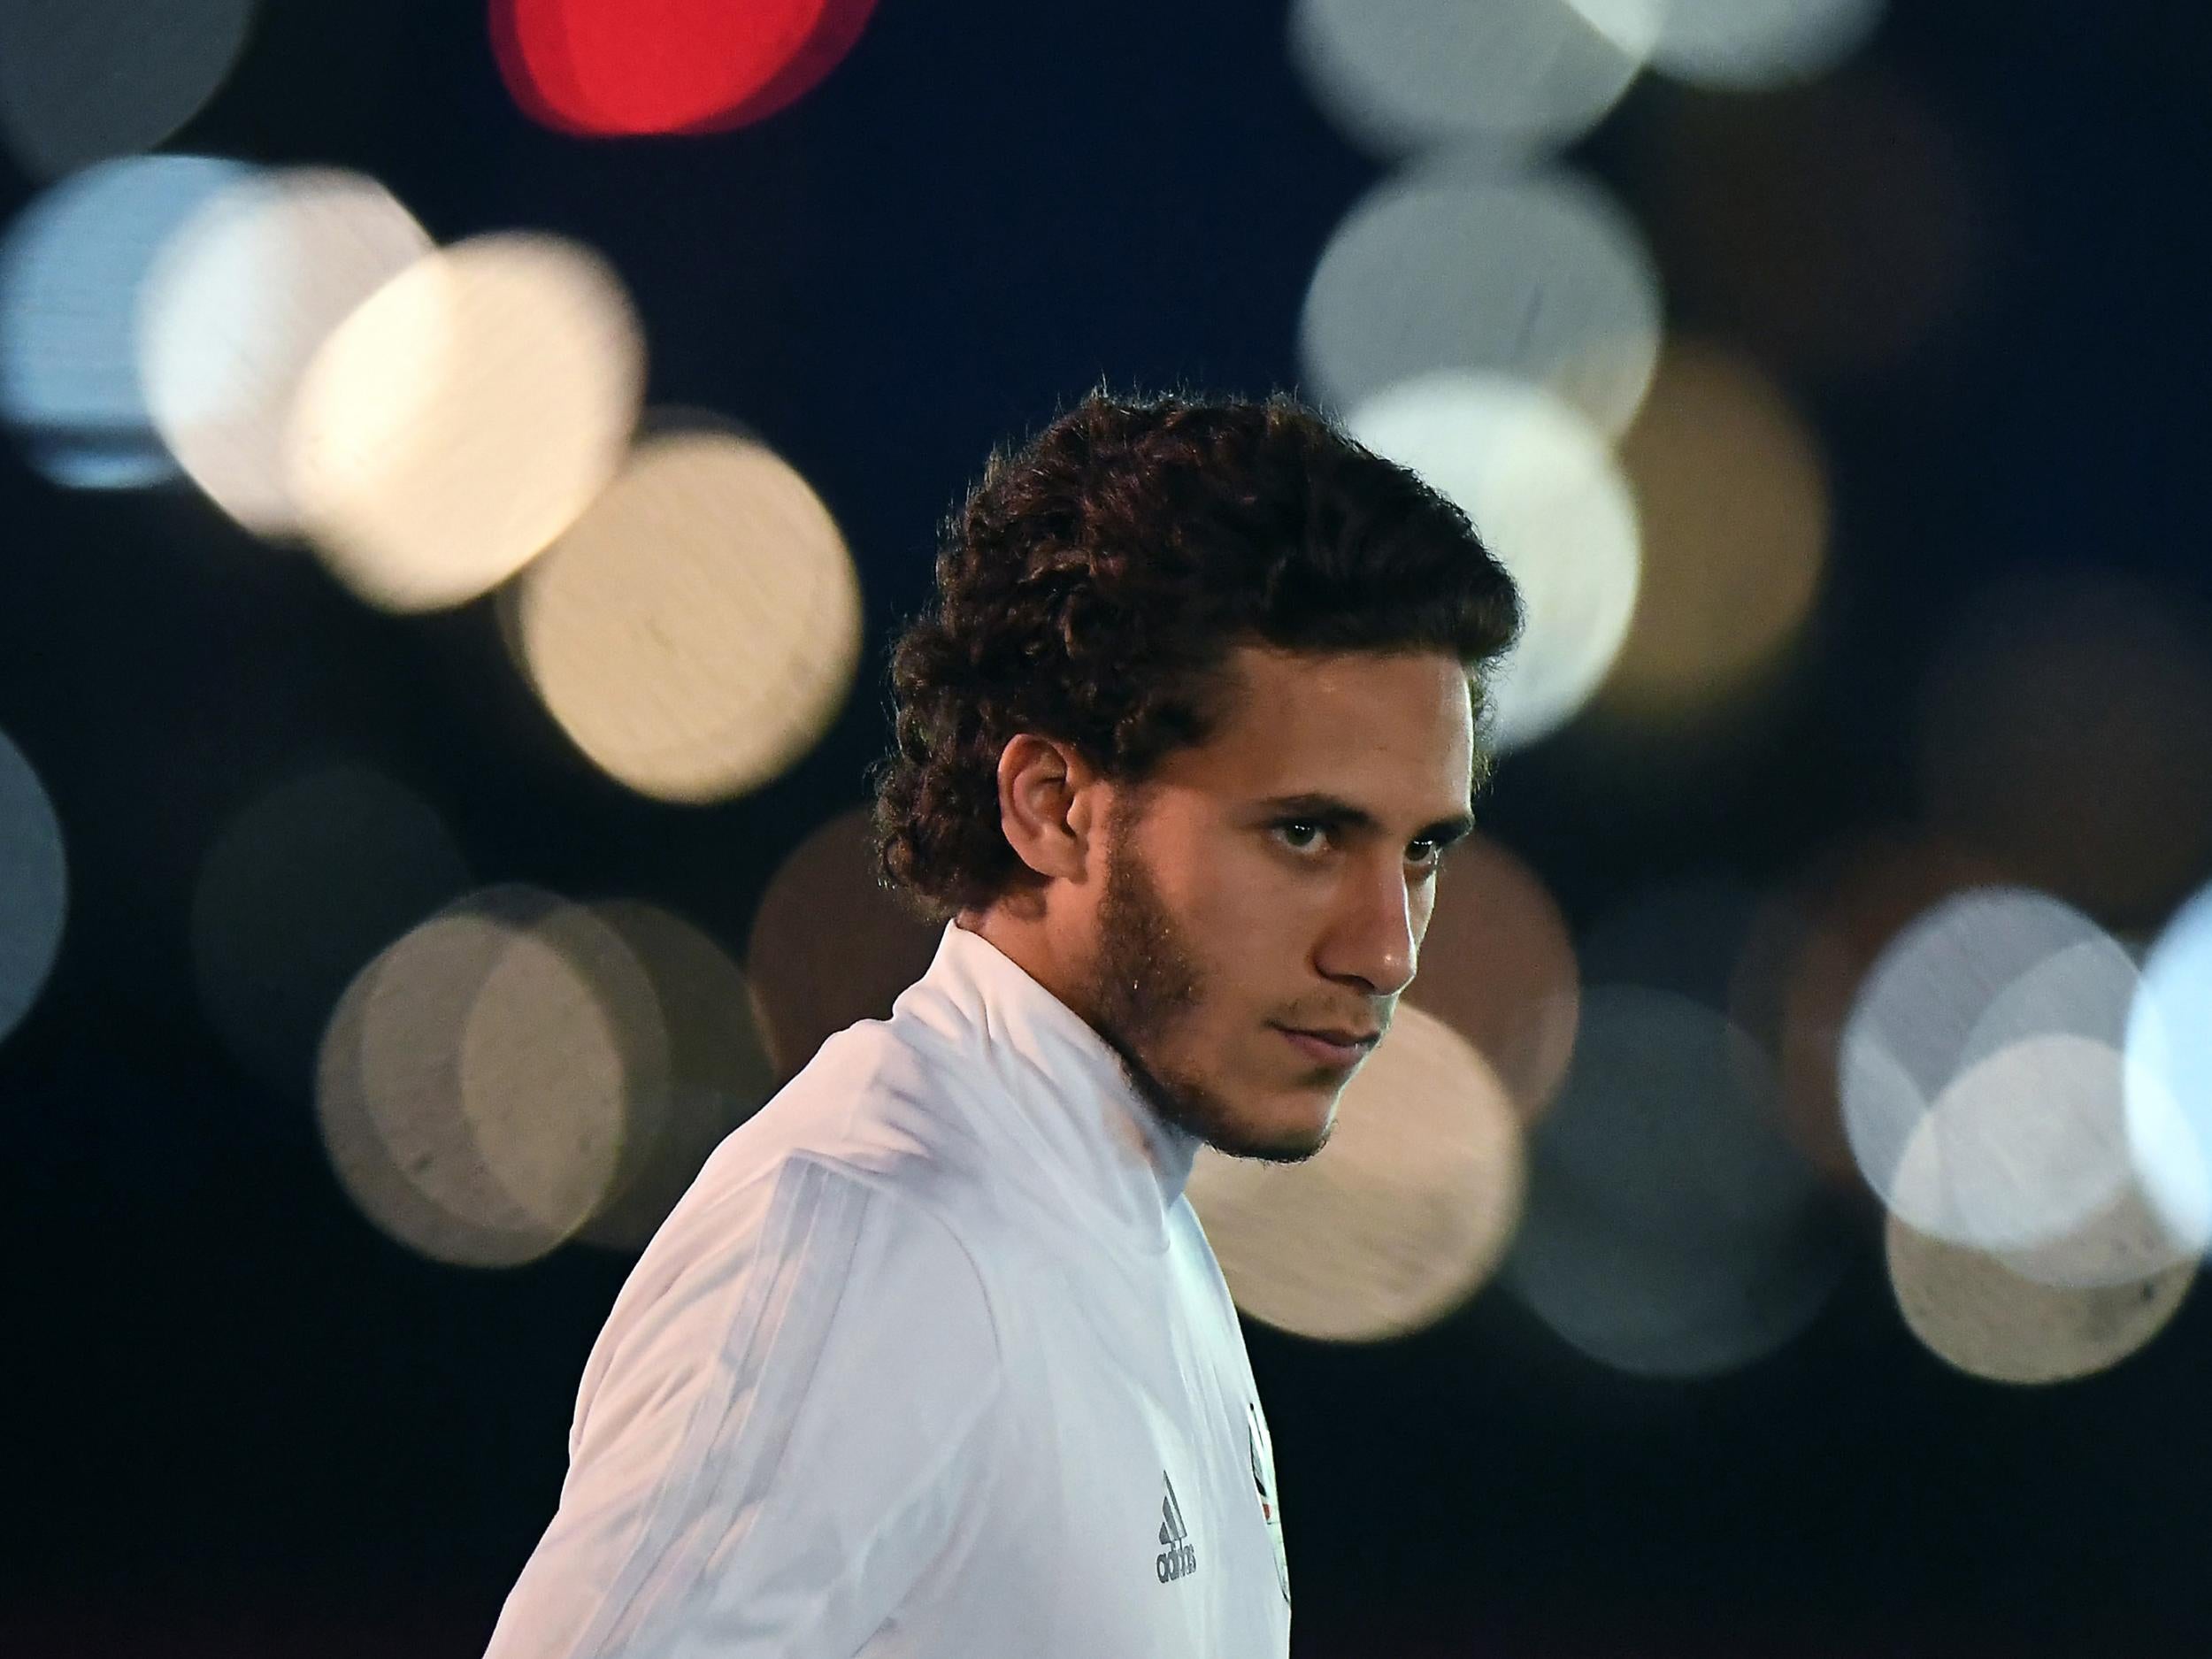 Sobhi is an exciting talent